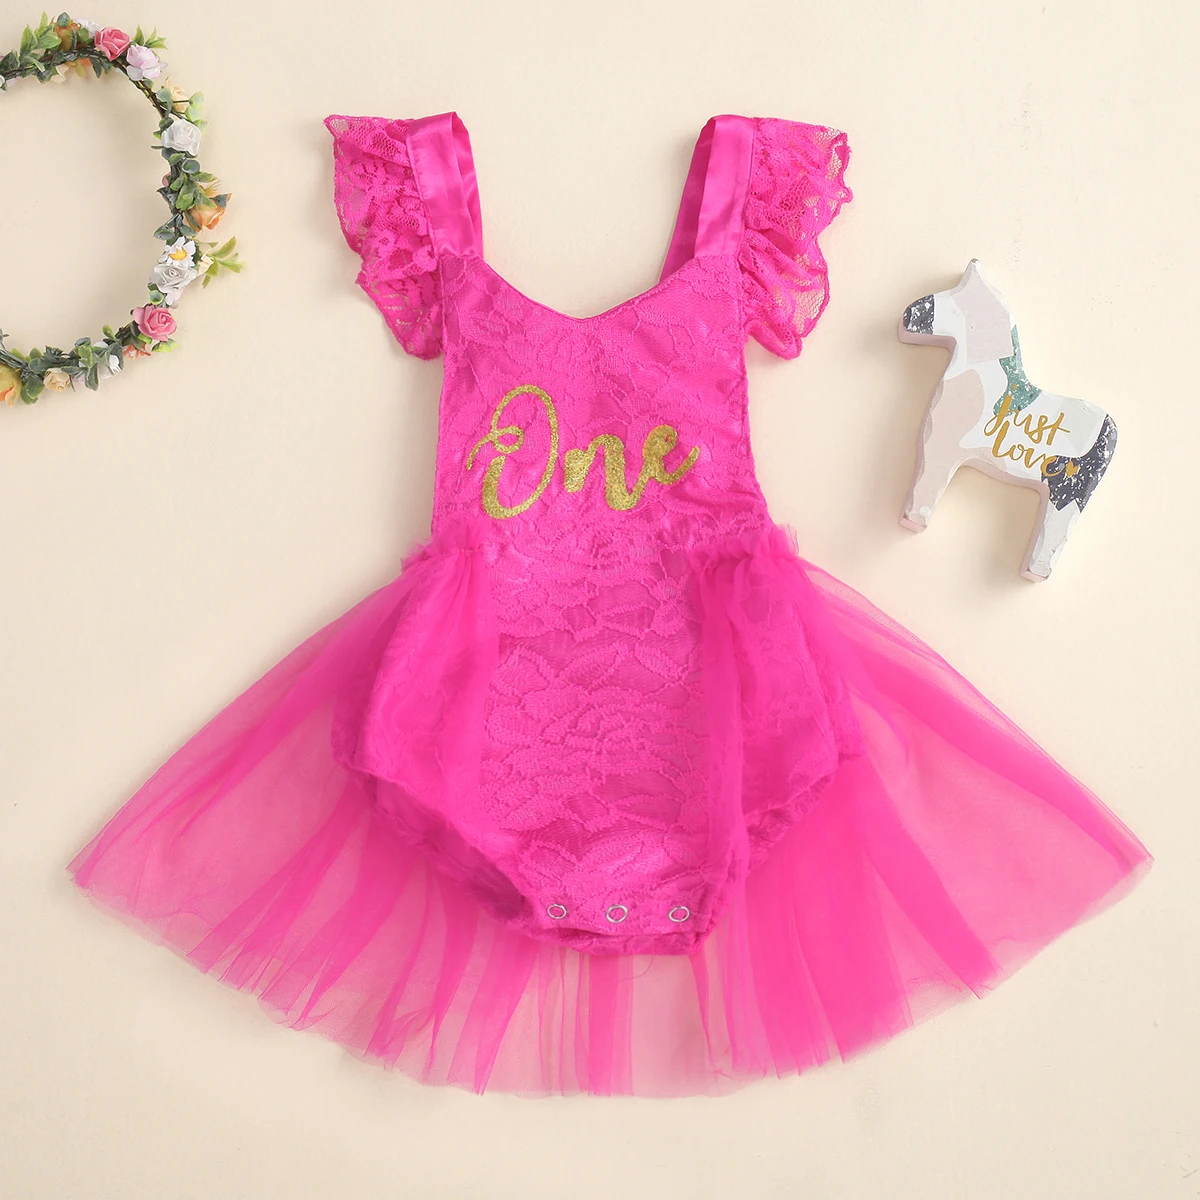 Baby Bodysuits made from viscose  FOCUSNORM 3 Colors Princess Baby Girls Birthday Romper Dress 0-24M One Letter Lace Printed Ruffles Sleeve Backless Jumpsuit Baby Bodysuits cheap